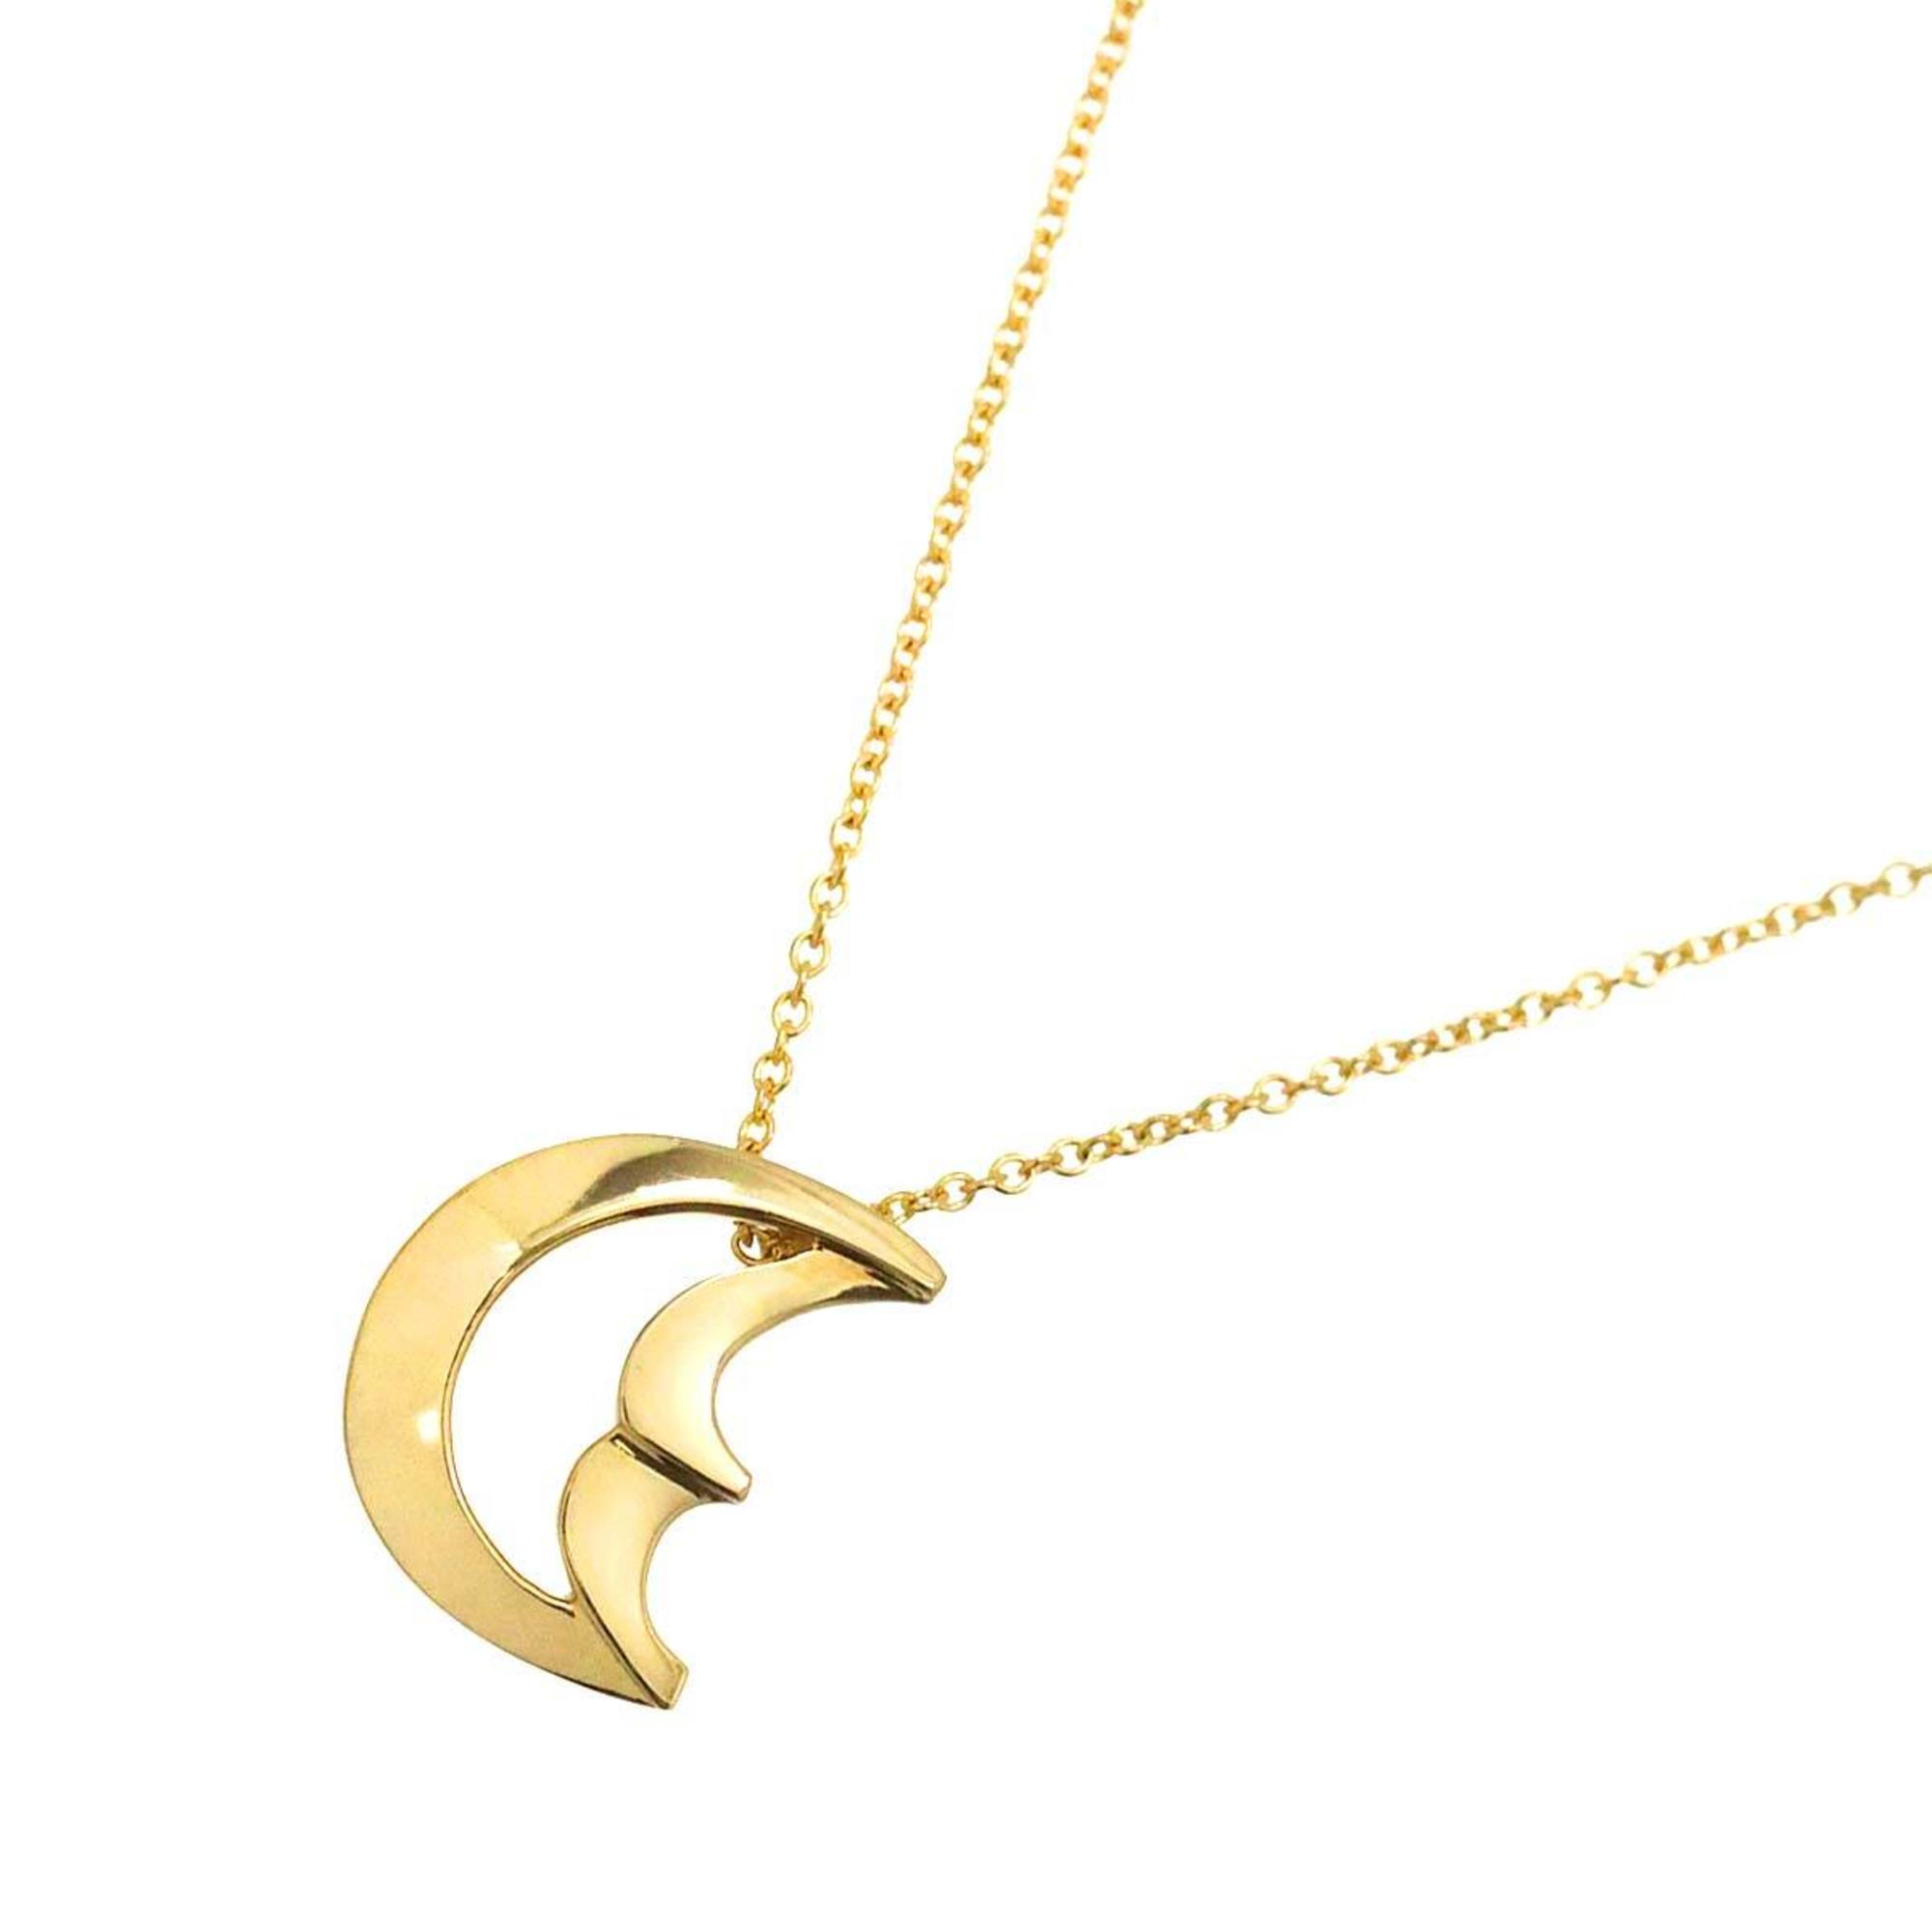 Tiffany & Co. Crescent Moon Necklace 41cm K18 YG Yellow Gold 750